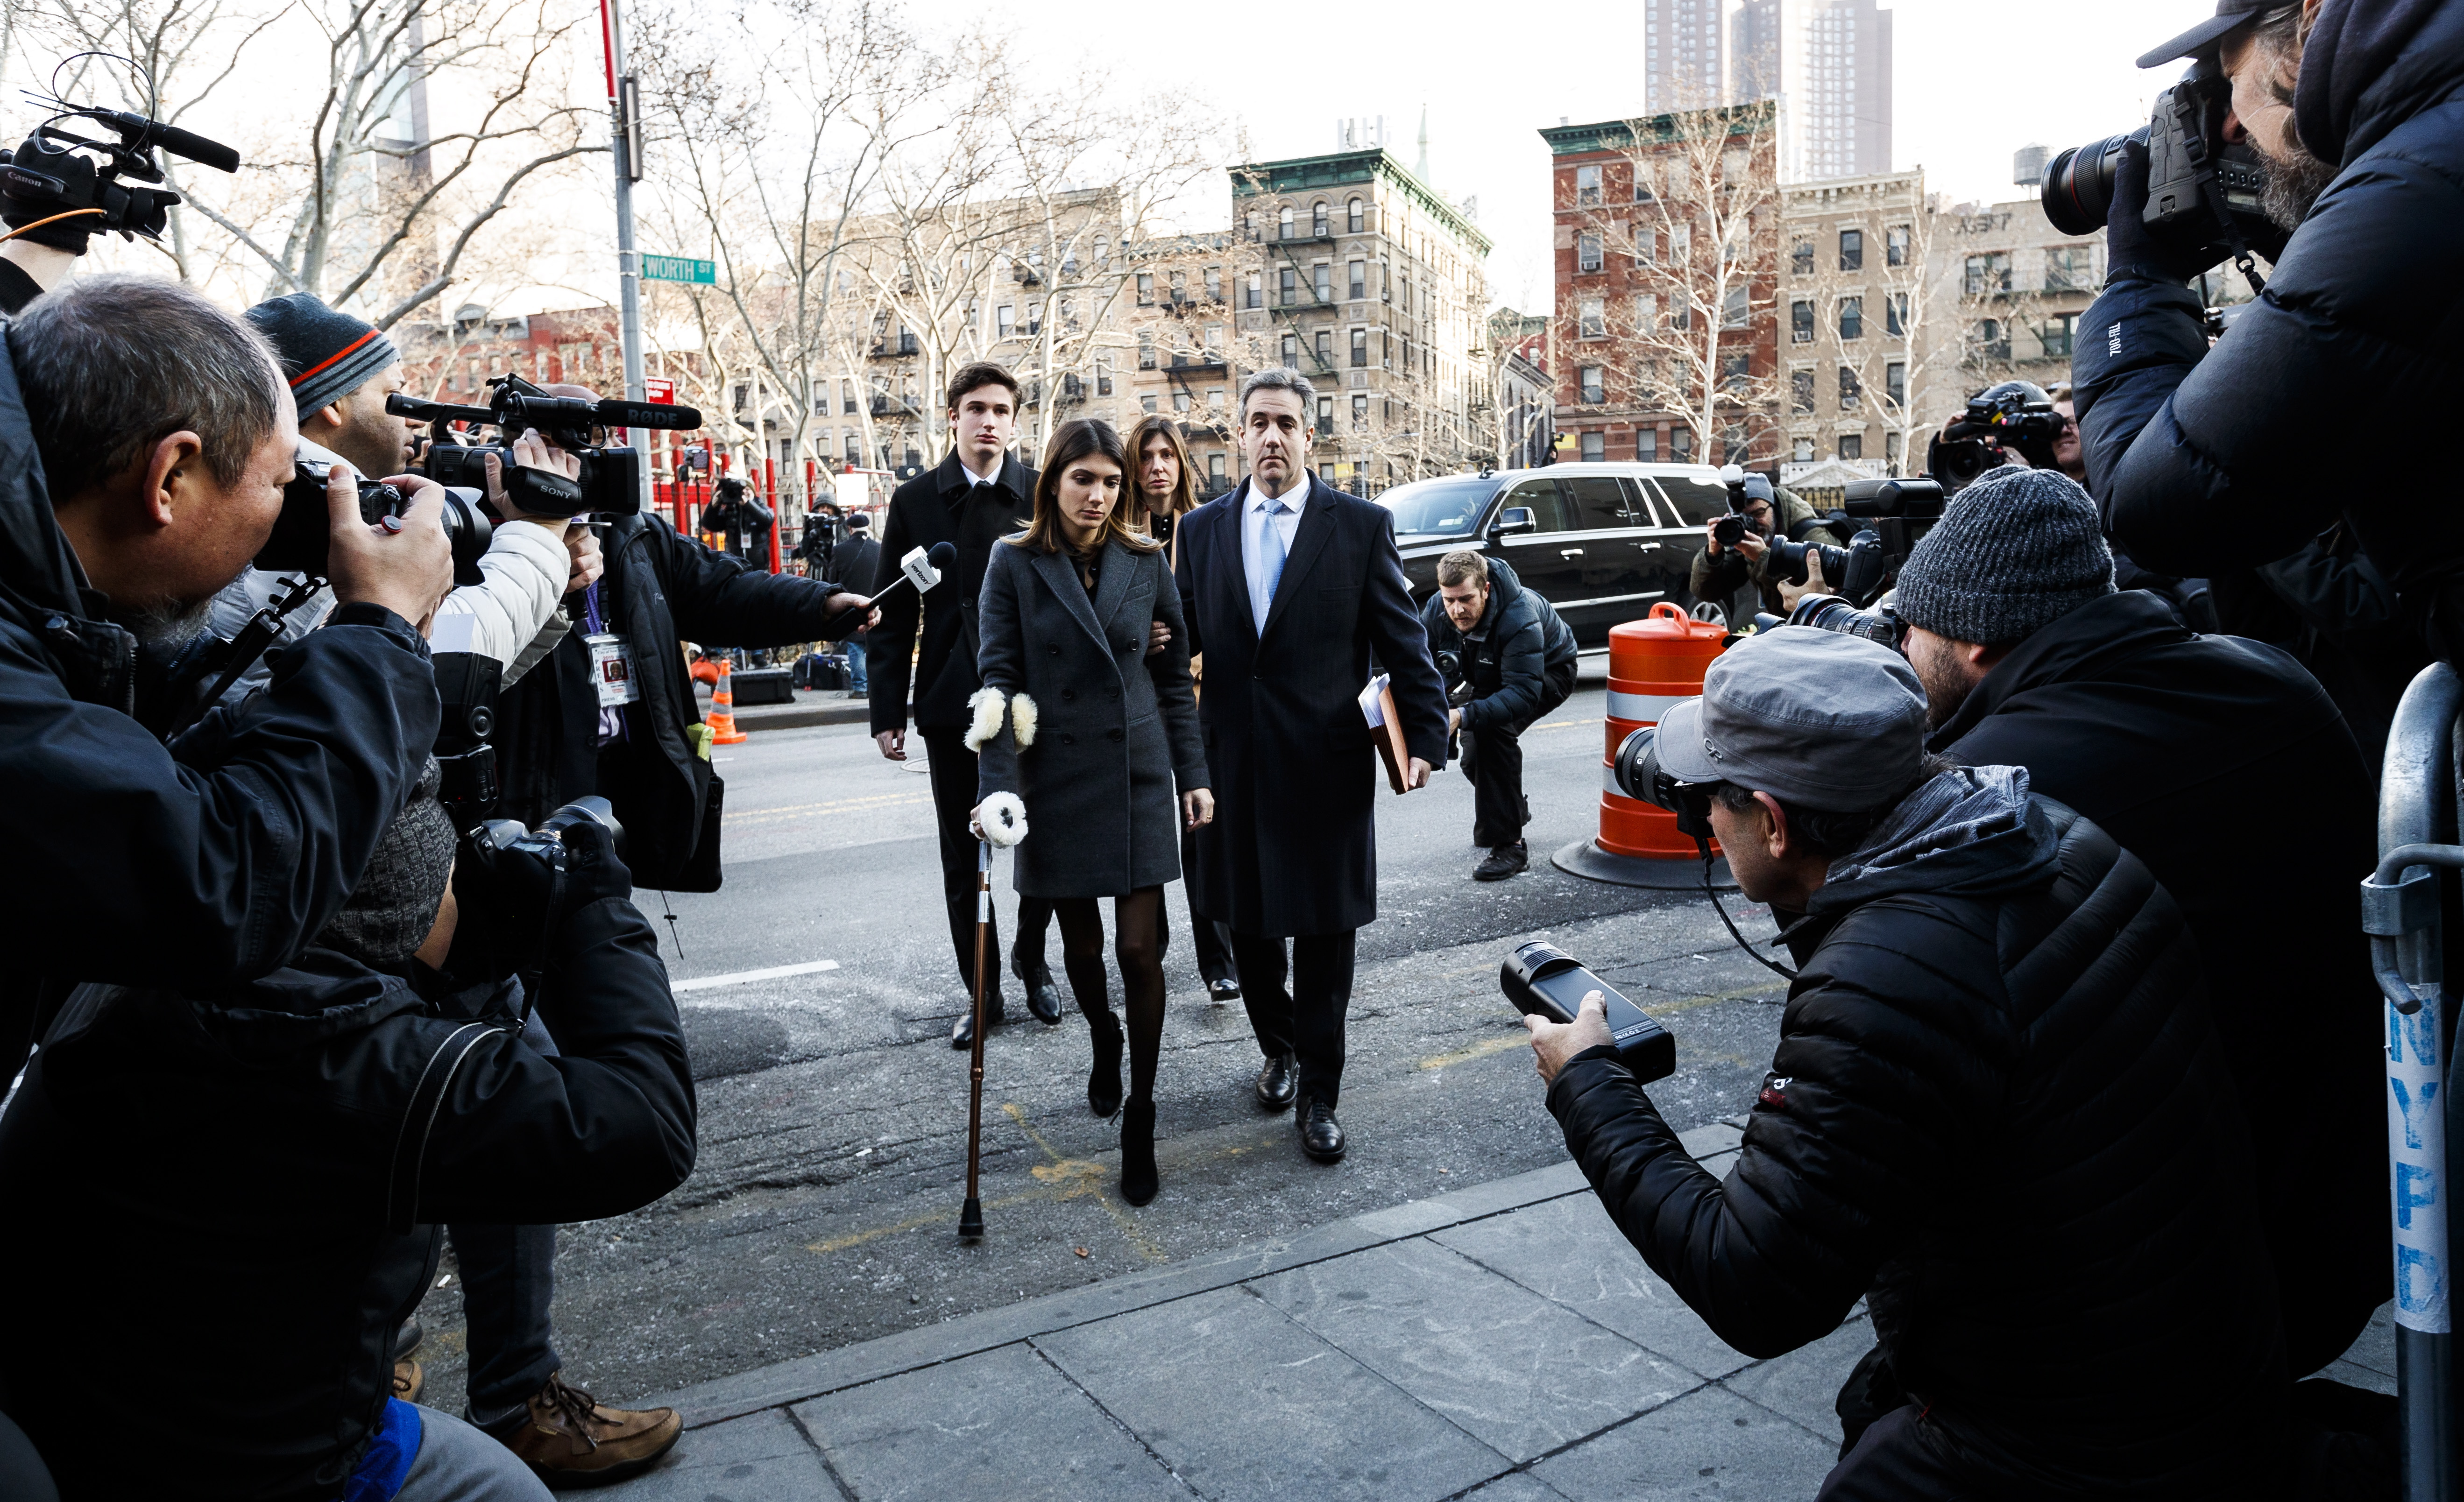 epa07226169 Michael Cohen (C), President Trump's former lawyer, arrives with his family for his sentencing hearing at United States Federal Court in New York, New York, USA, 12 December 2018.  EPA/JUSTIN LANE